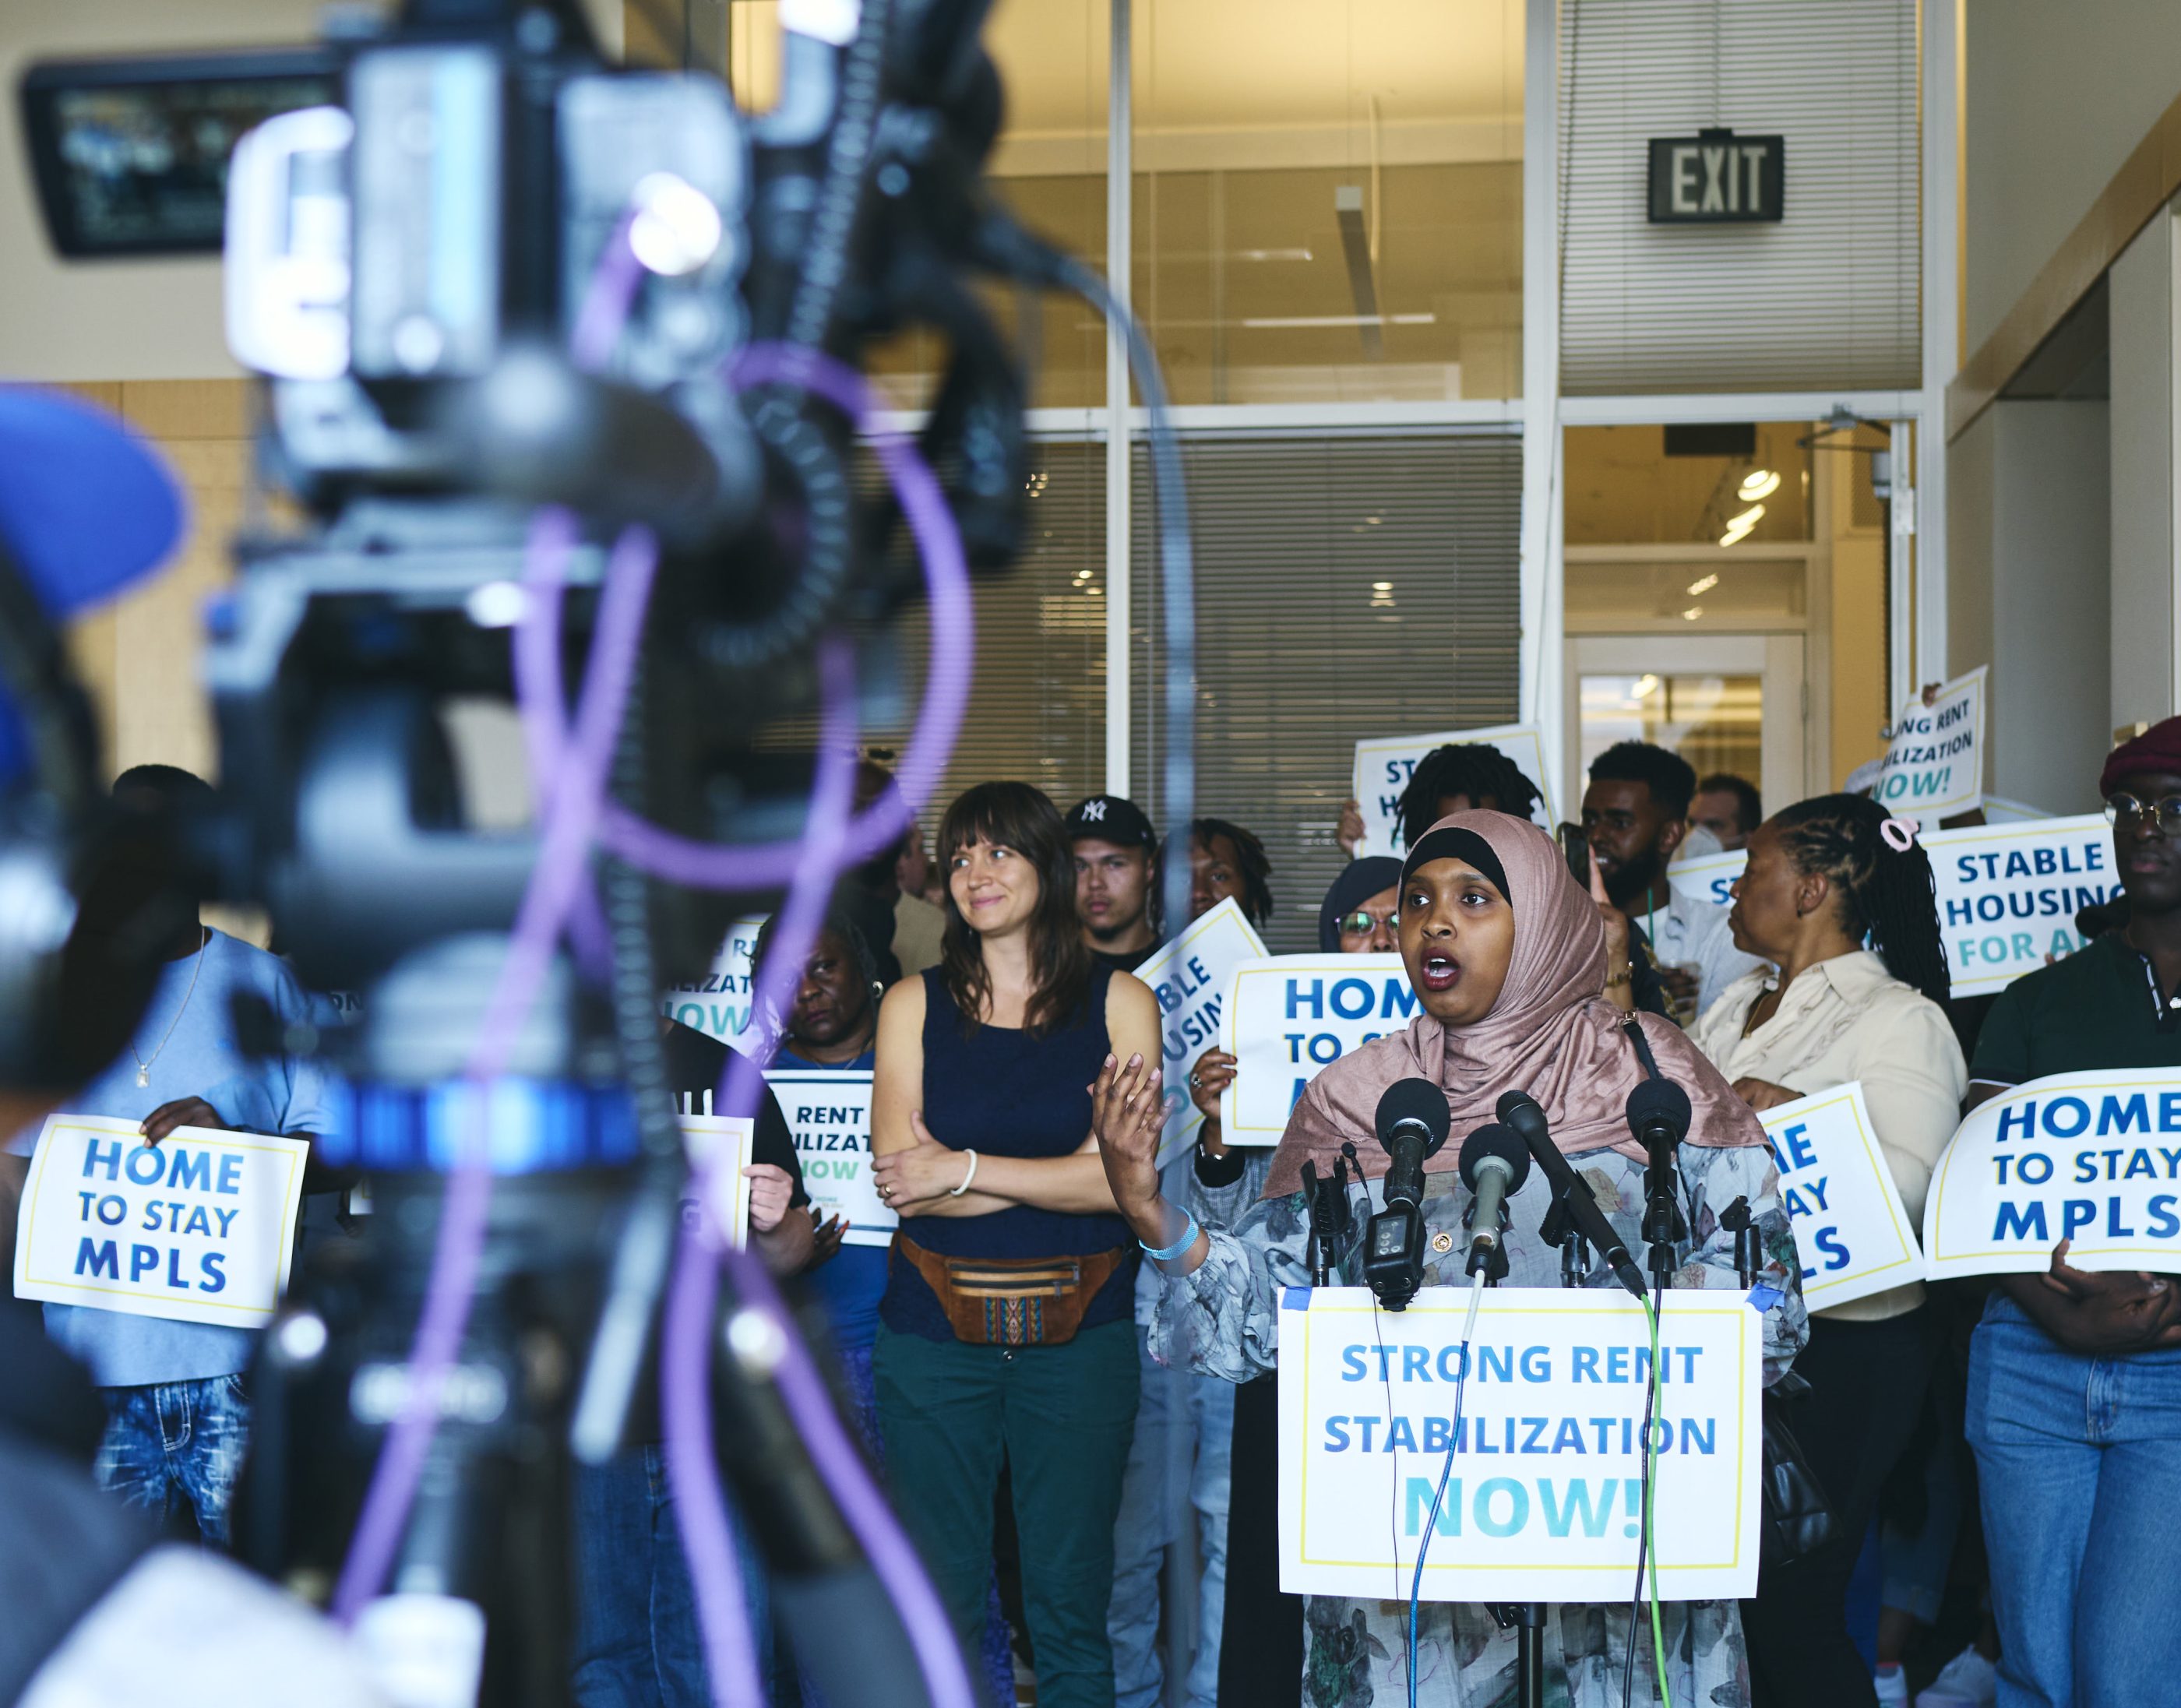 A Black woman in blue flowered dress and dusty pink hijab speaks into several microphones. In foreground, blurry, are news cameras. The woman is part of a large group at a rally, carrying signs promoting rent stabilization and saying "Home to Stay MPLS"